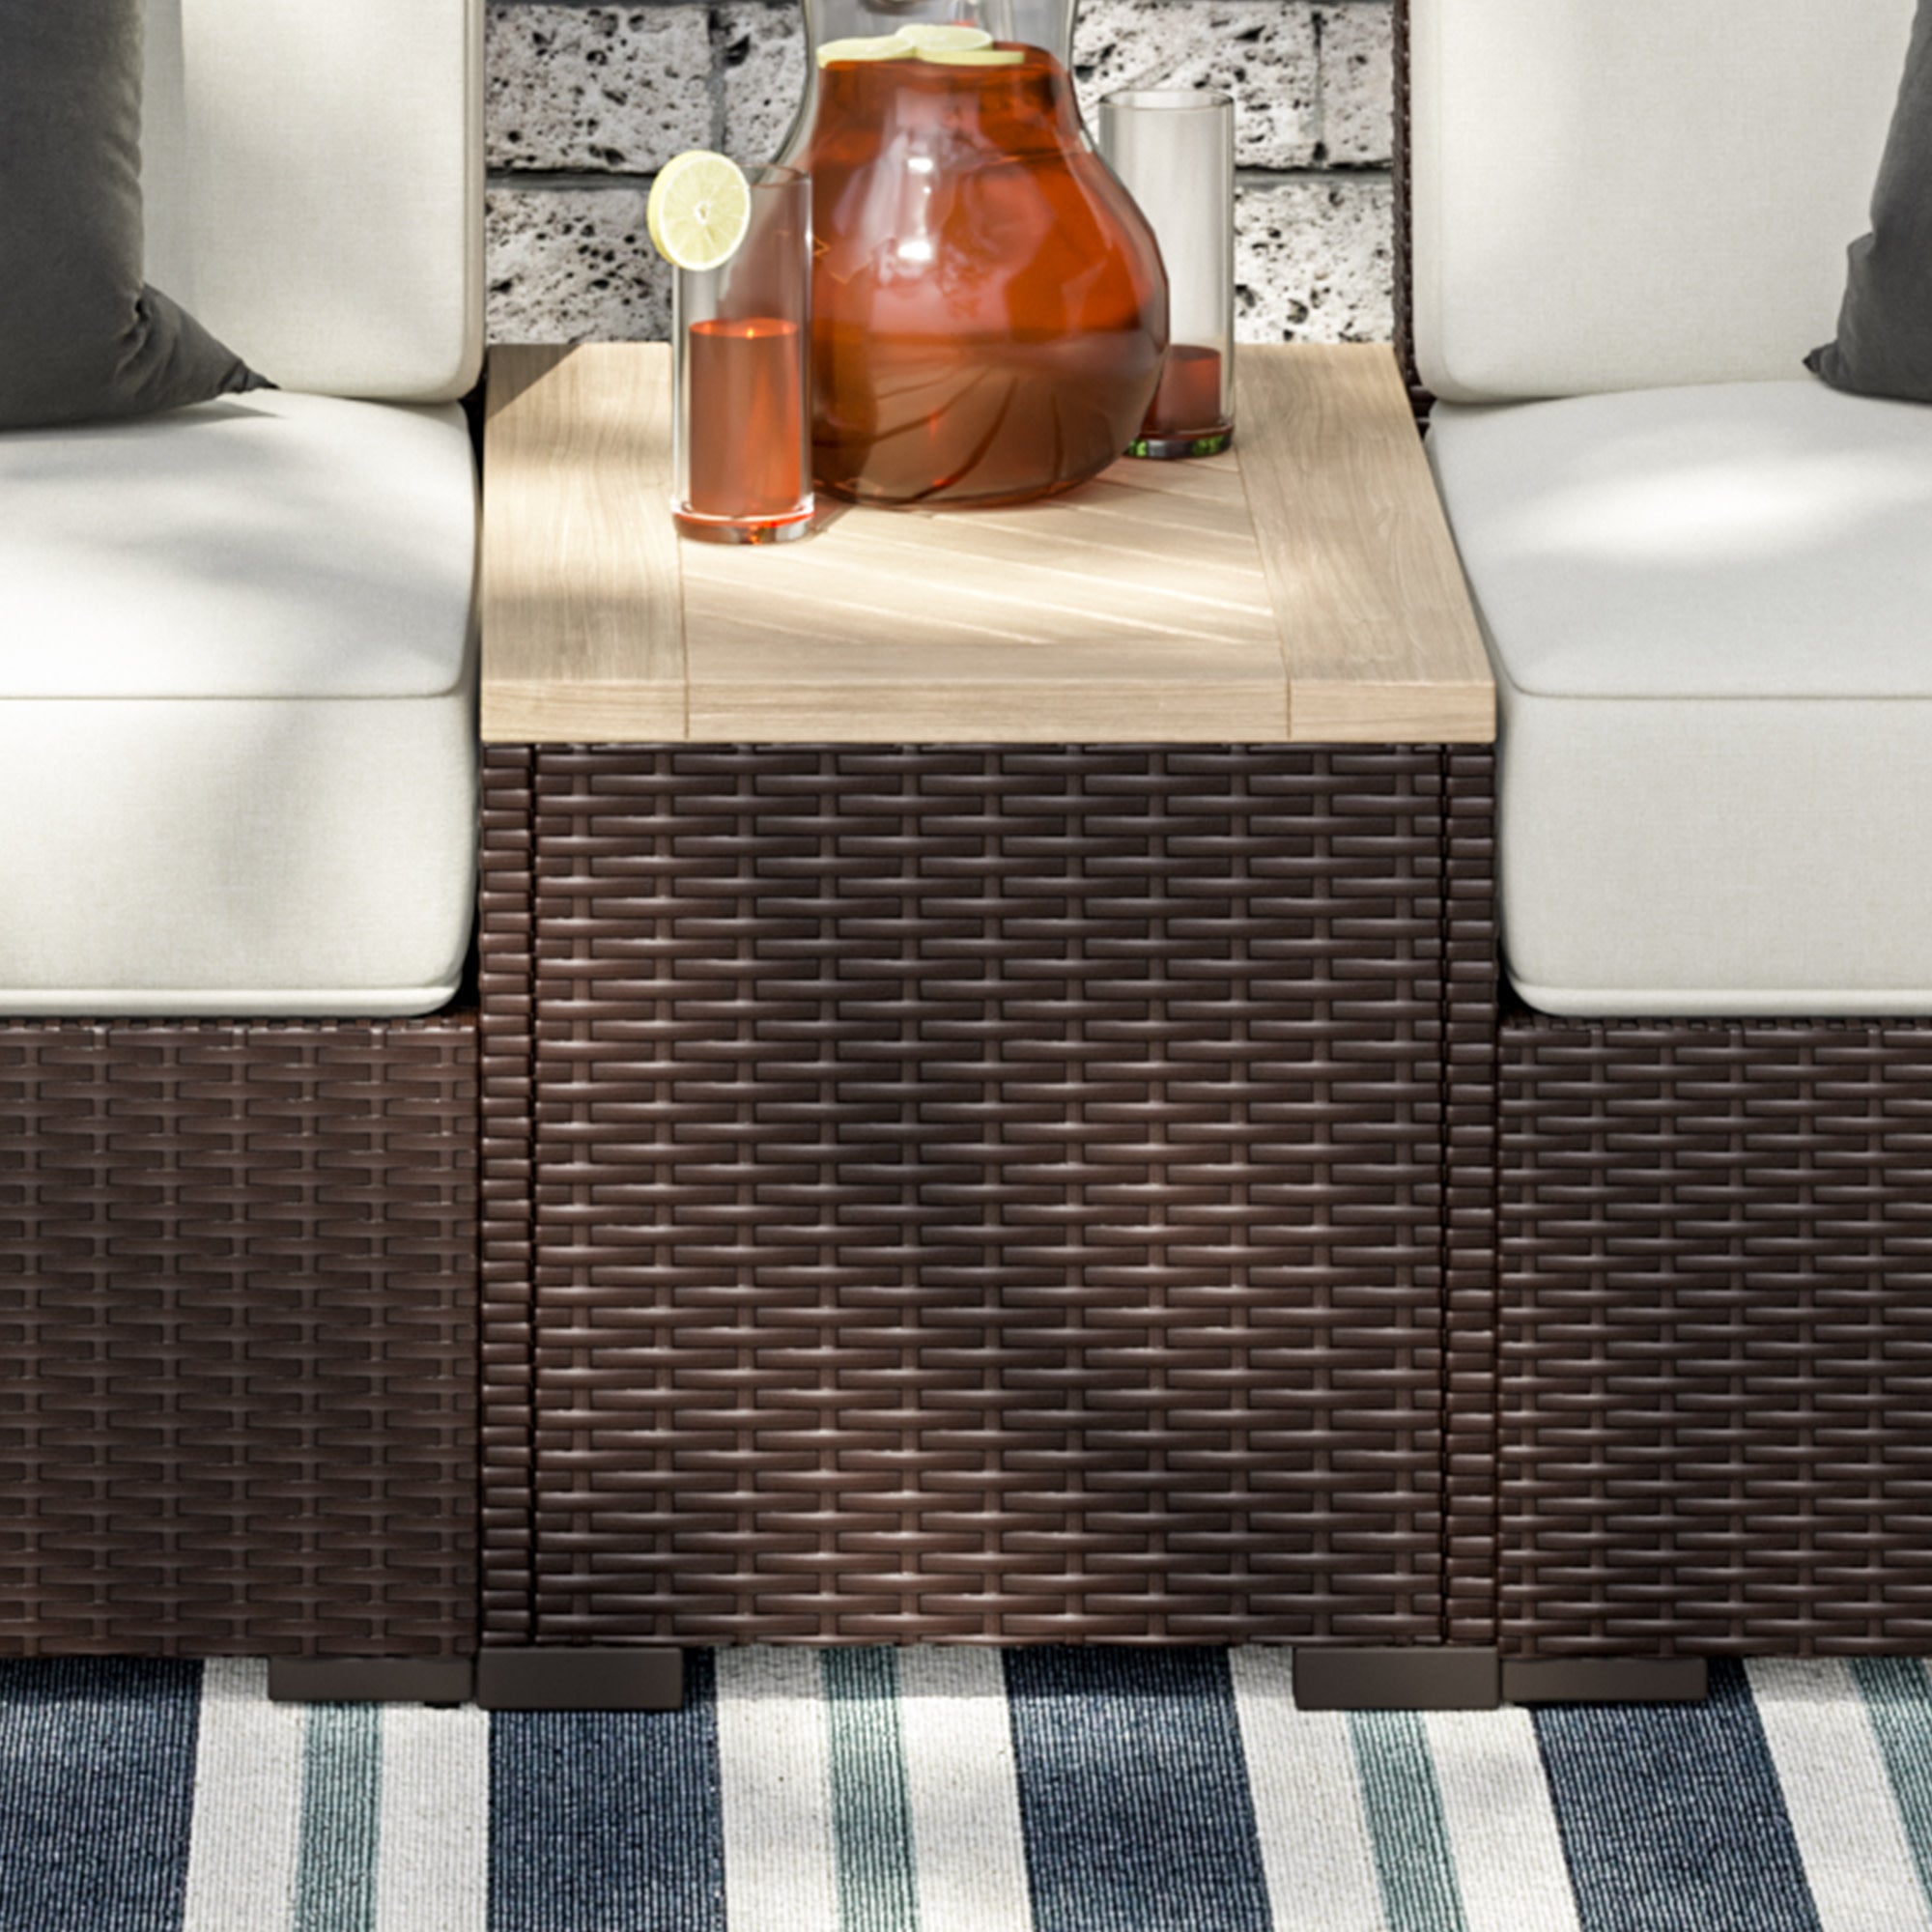 Palm Springs Outdoor Chair Pair and Storage Table by Homestyles - Brown - Rattan - 6800-12D-23